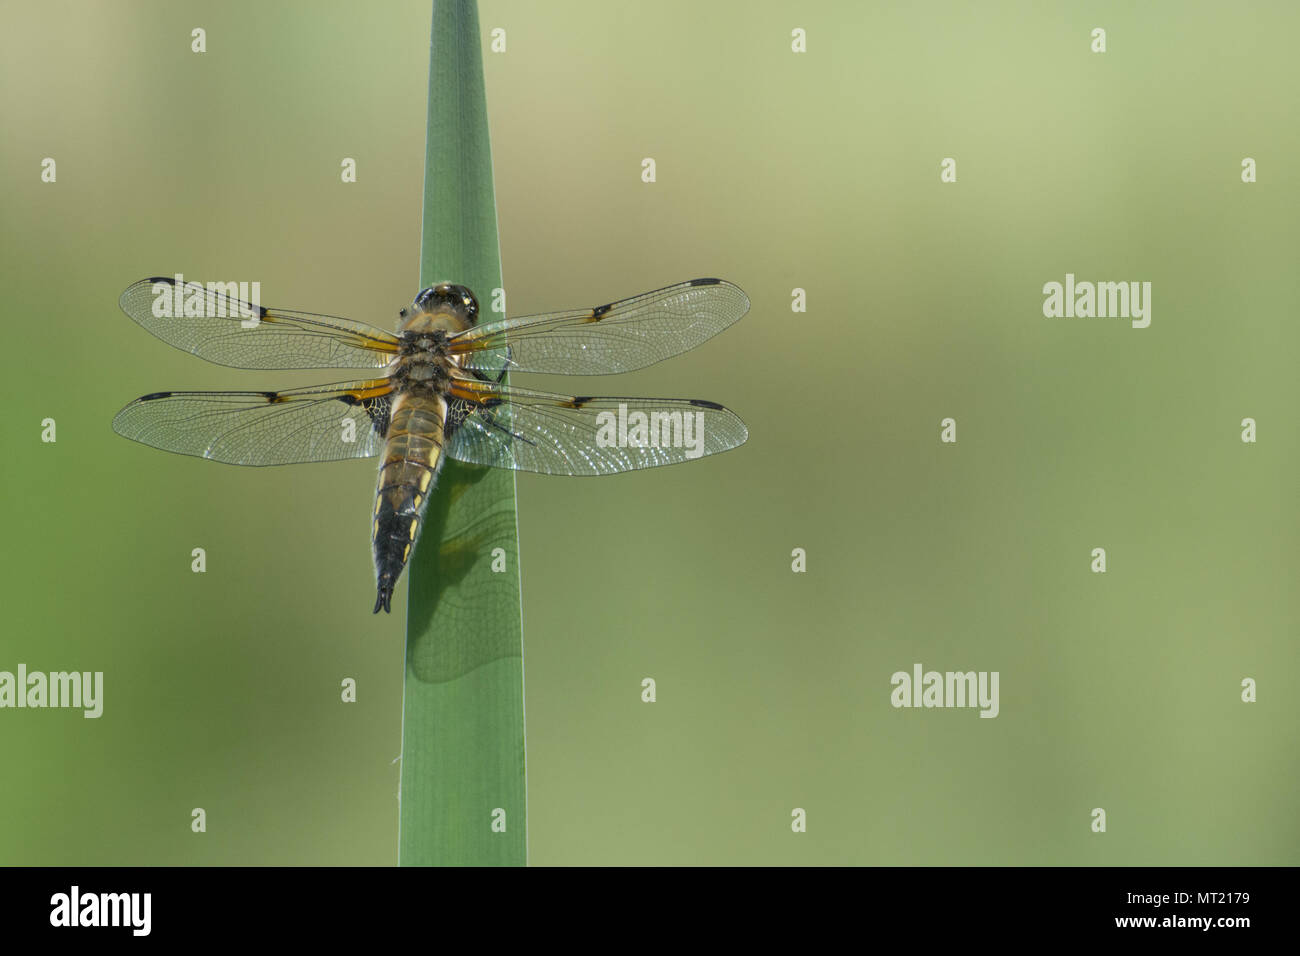 Four-spotted chaser dragonfly (Libellula quadrimaculata) perched on pond vegetation in Hampshire, UK Stock Photo